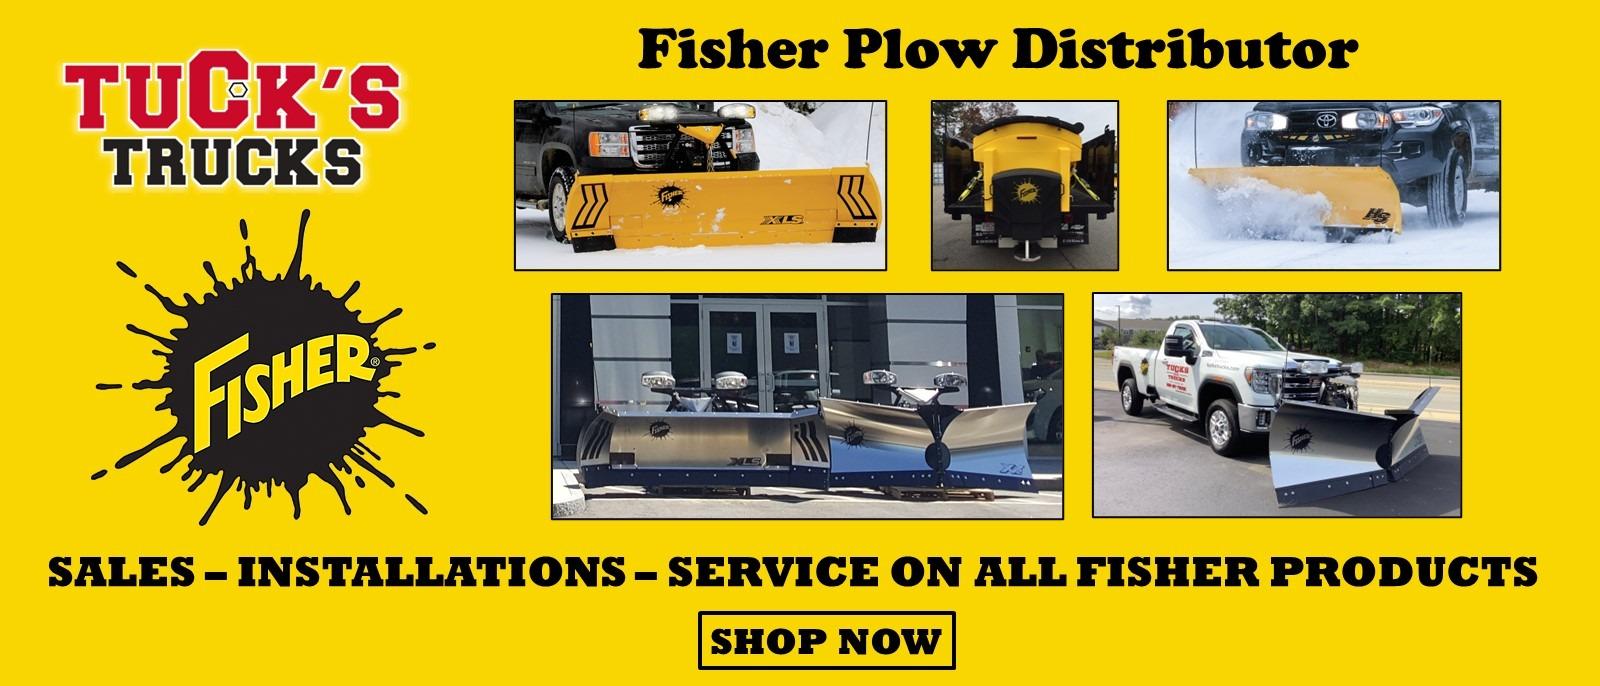 Get a Fisher Plow at Tuck's Trucks GMC.  A Fisher plow distributor.